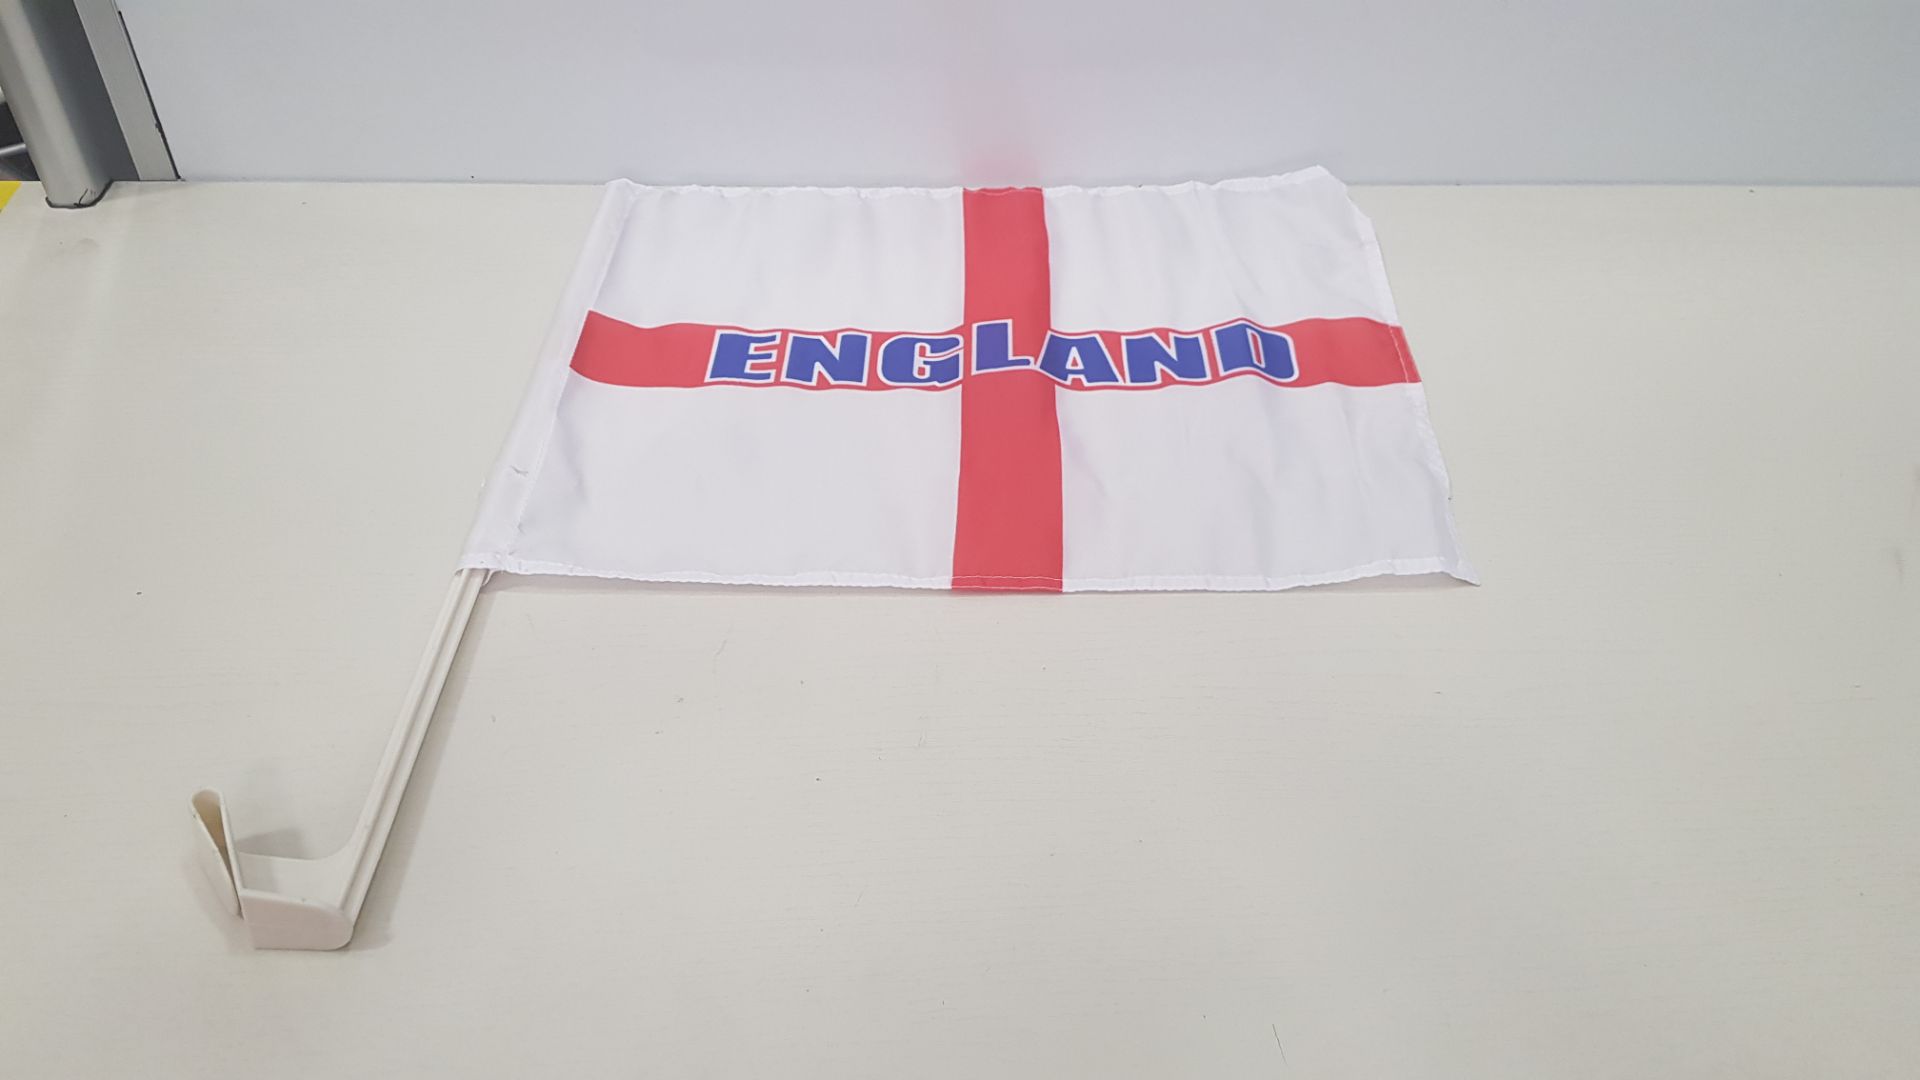 500 ENGLAND FLAGS TO ATTACH ON CAR (10 BOXES)